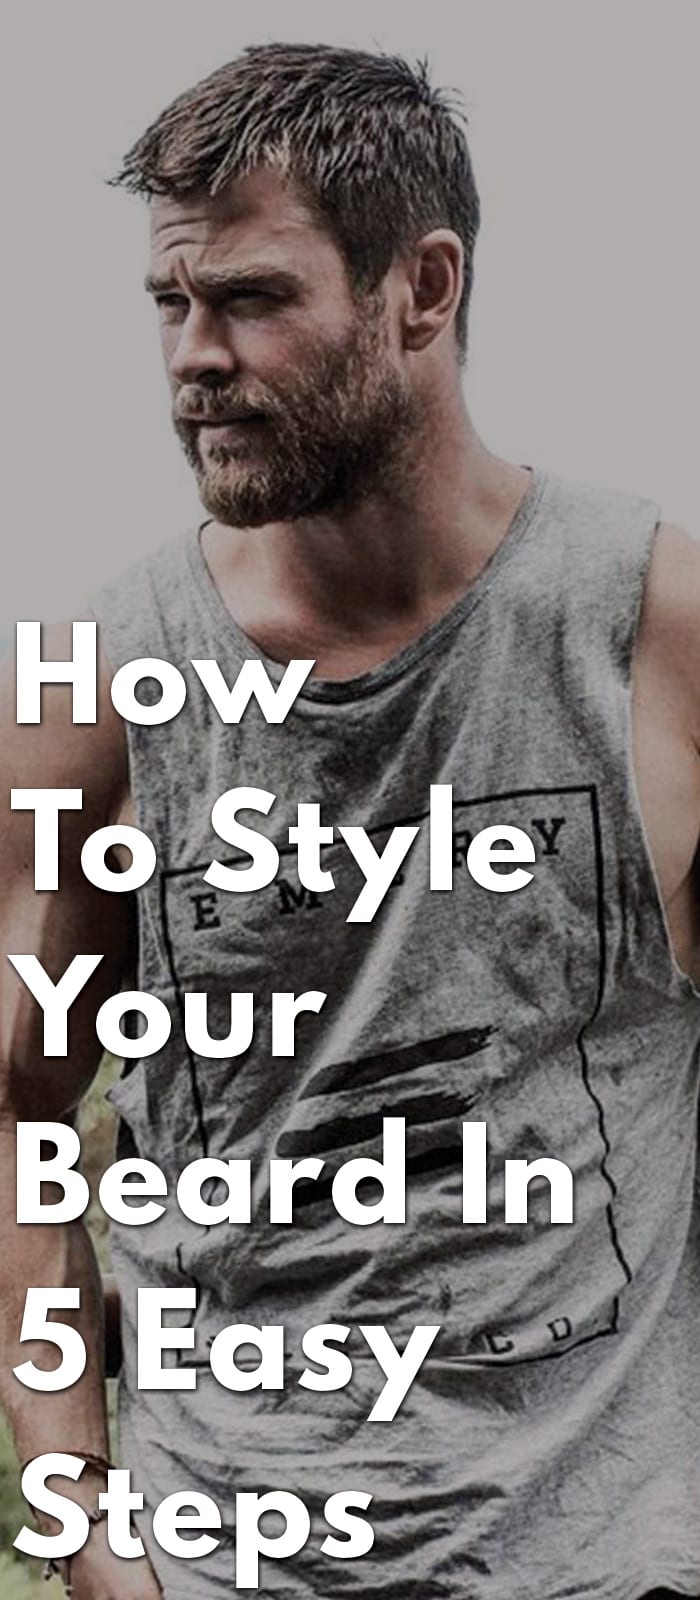 How-To-Style-Your-Beard-In-5-Easy-Steps